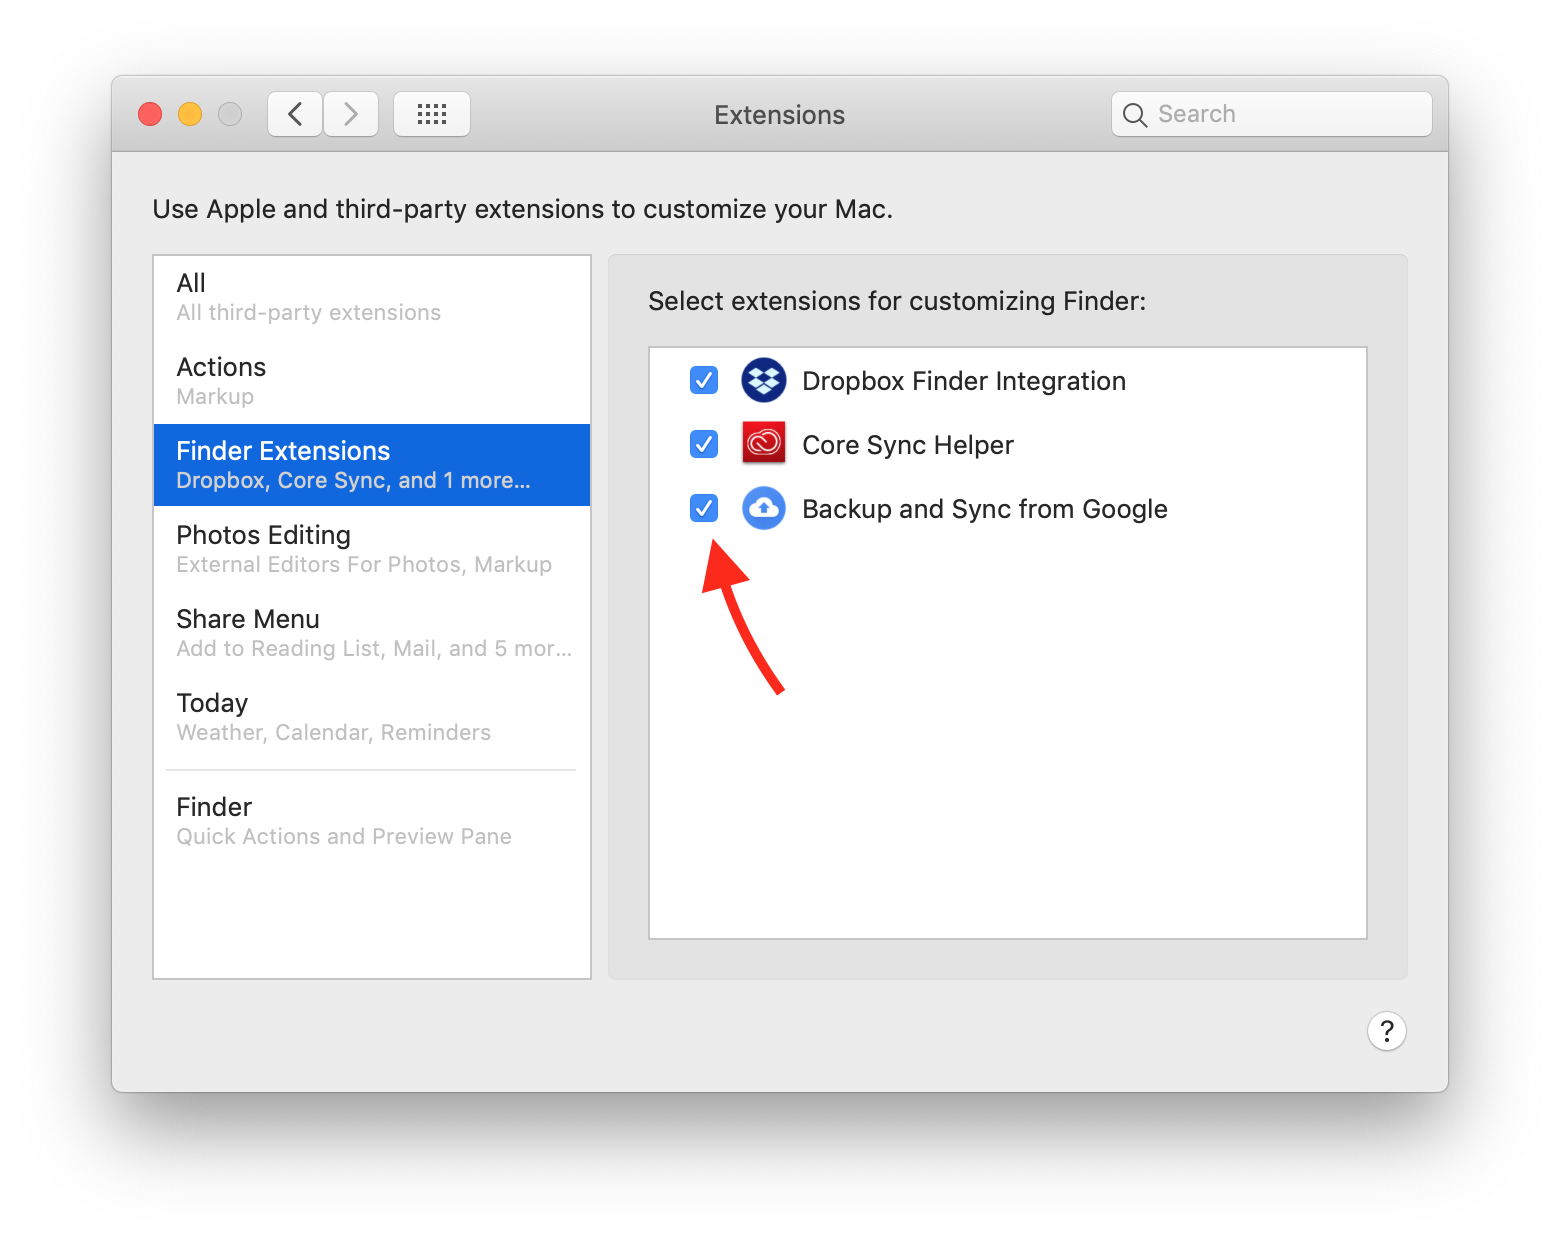 google drive download and sync for mac 10.7.5